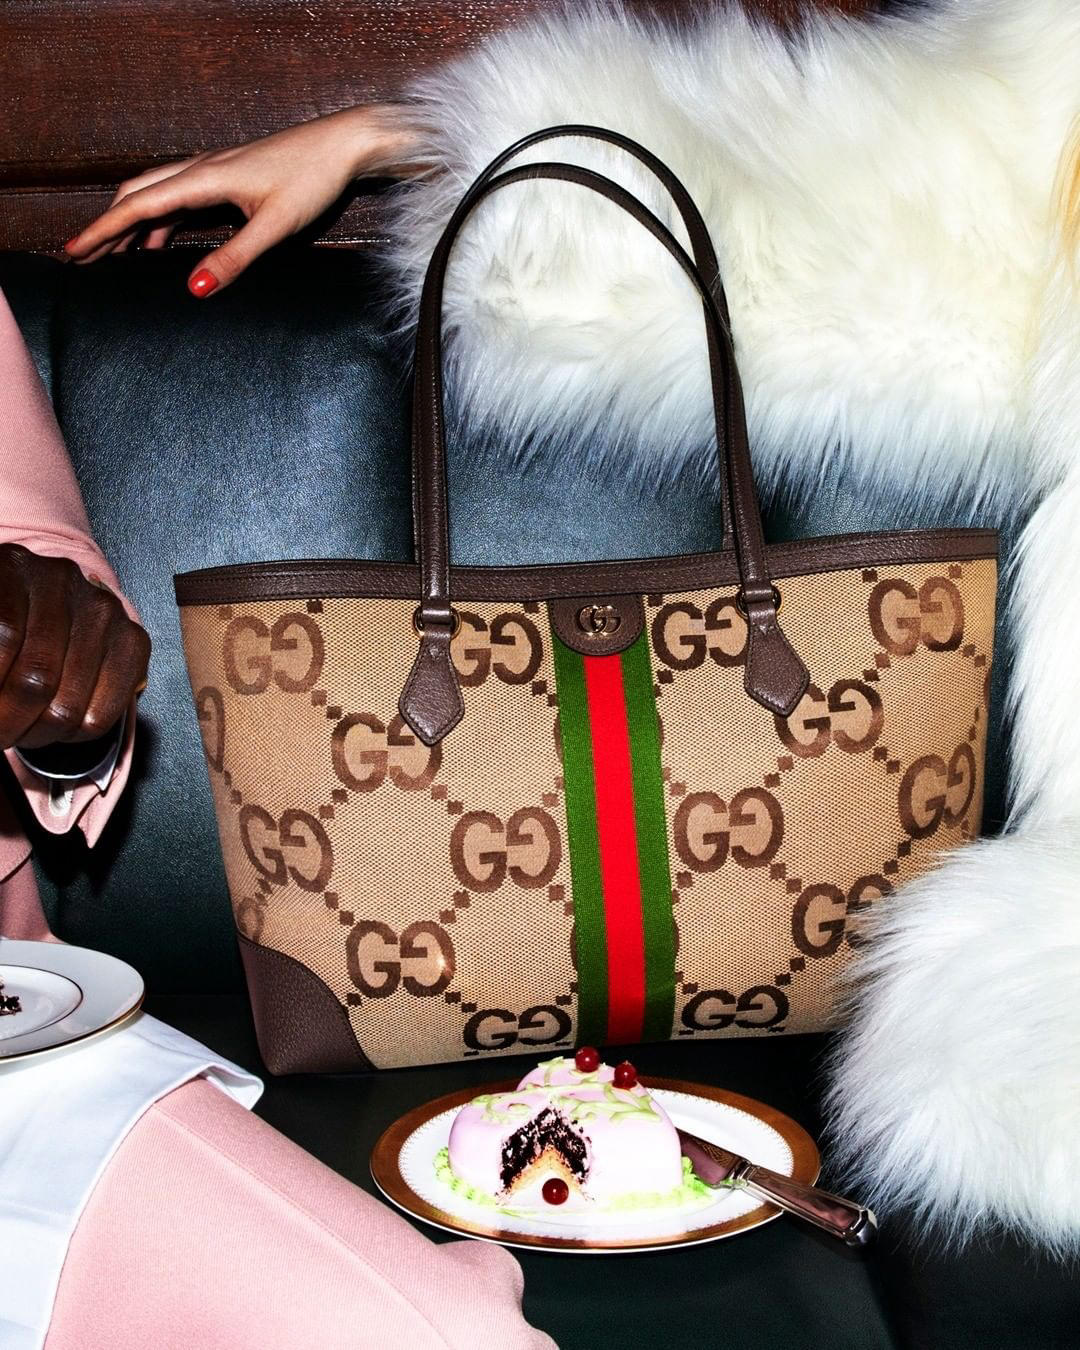 image  1 Since its introduction into Gucci’s repertoire of motifs, the GG monogram has provided a canvas to p